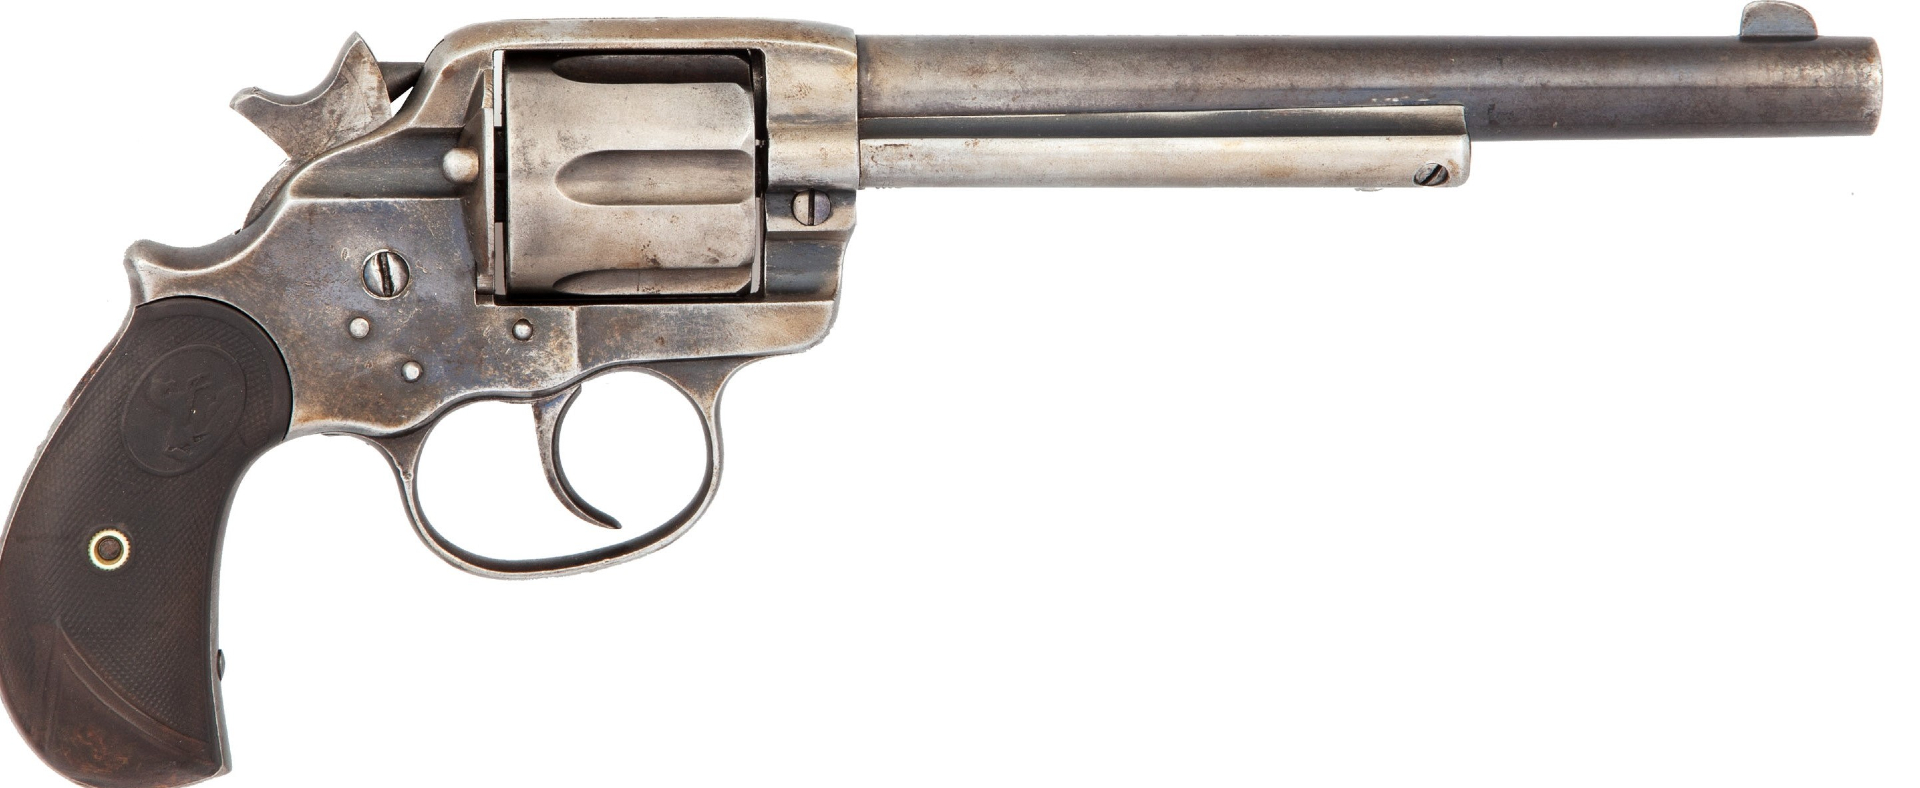 The Model 1878 Colt Was a Double Action That Saw Limited Action in ...